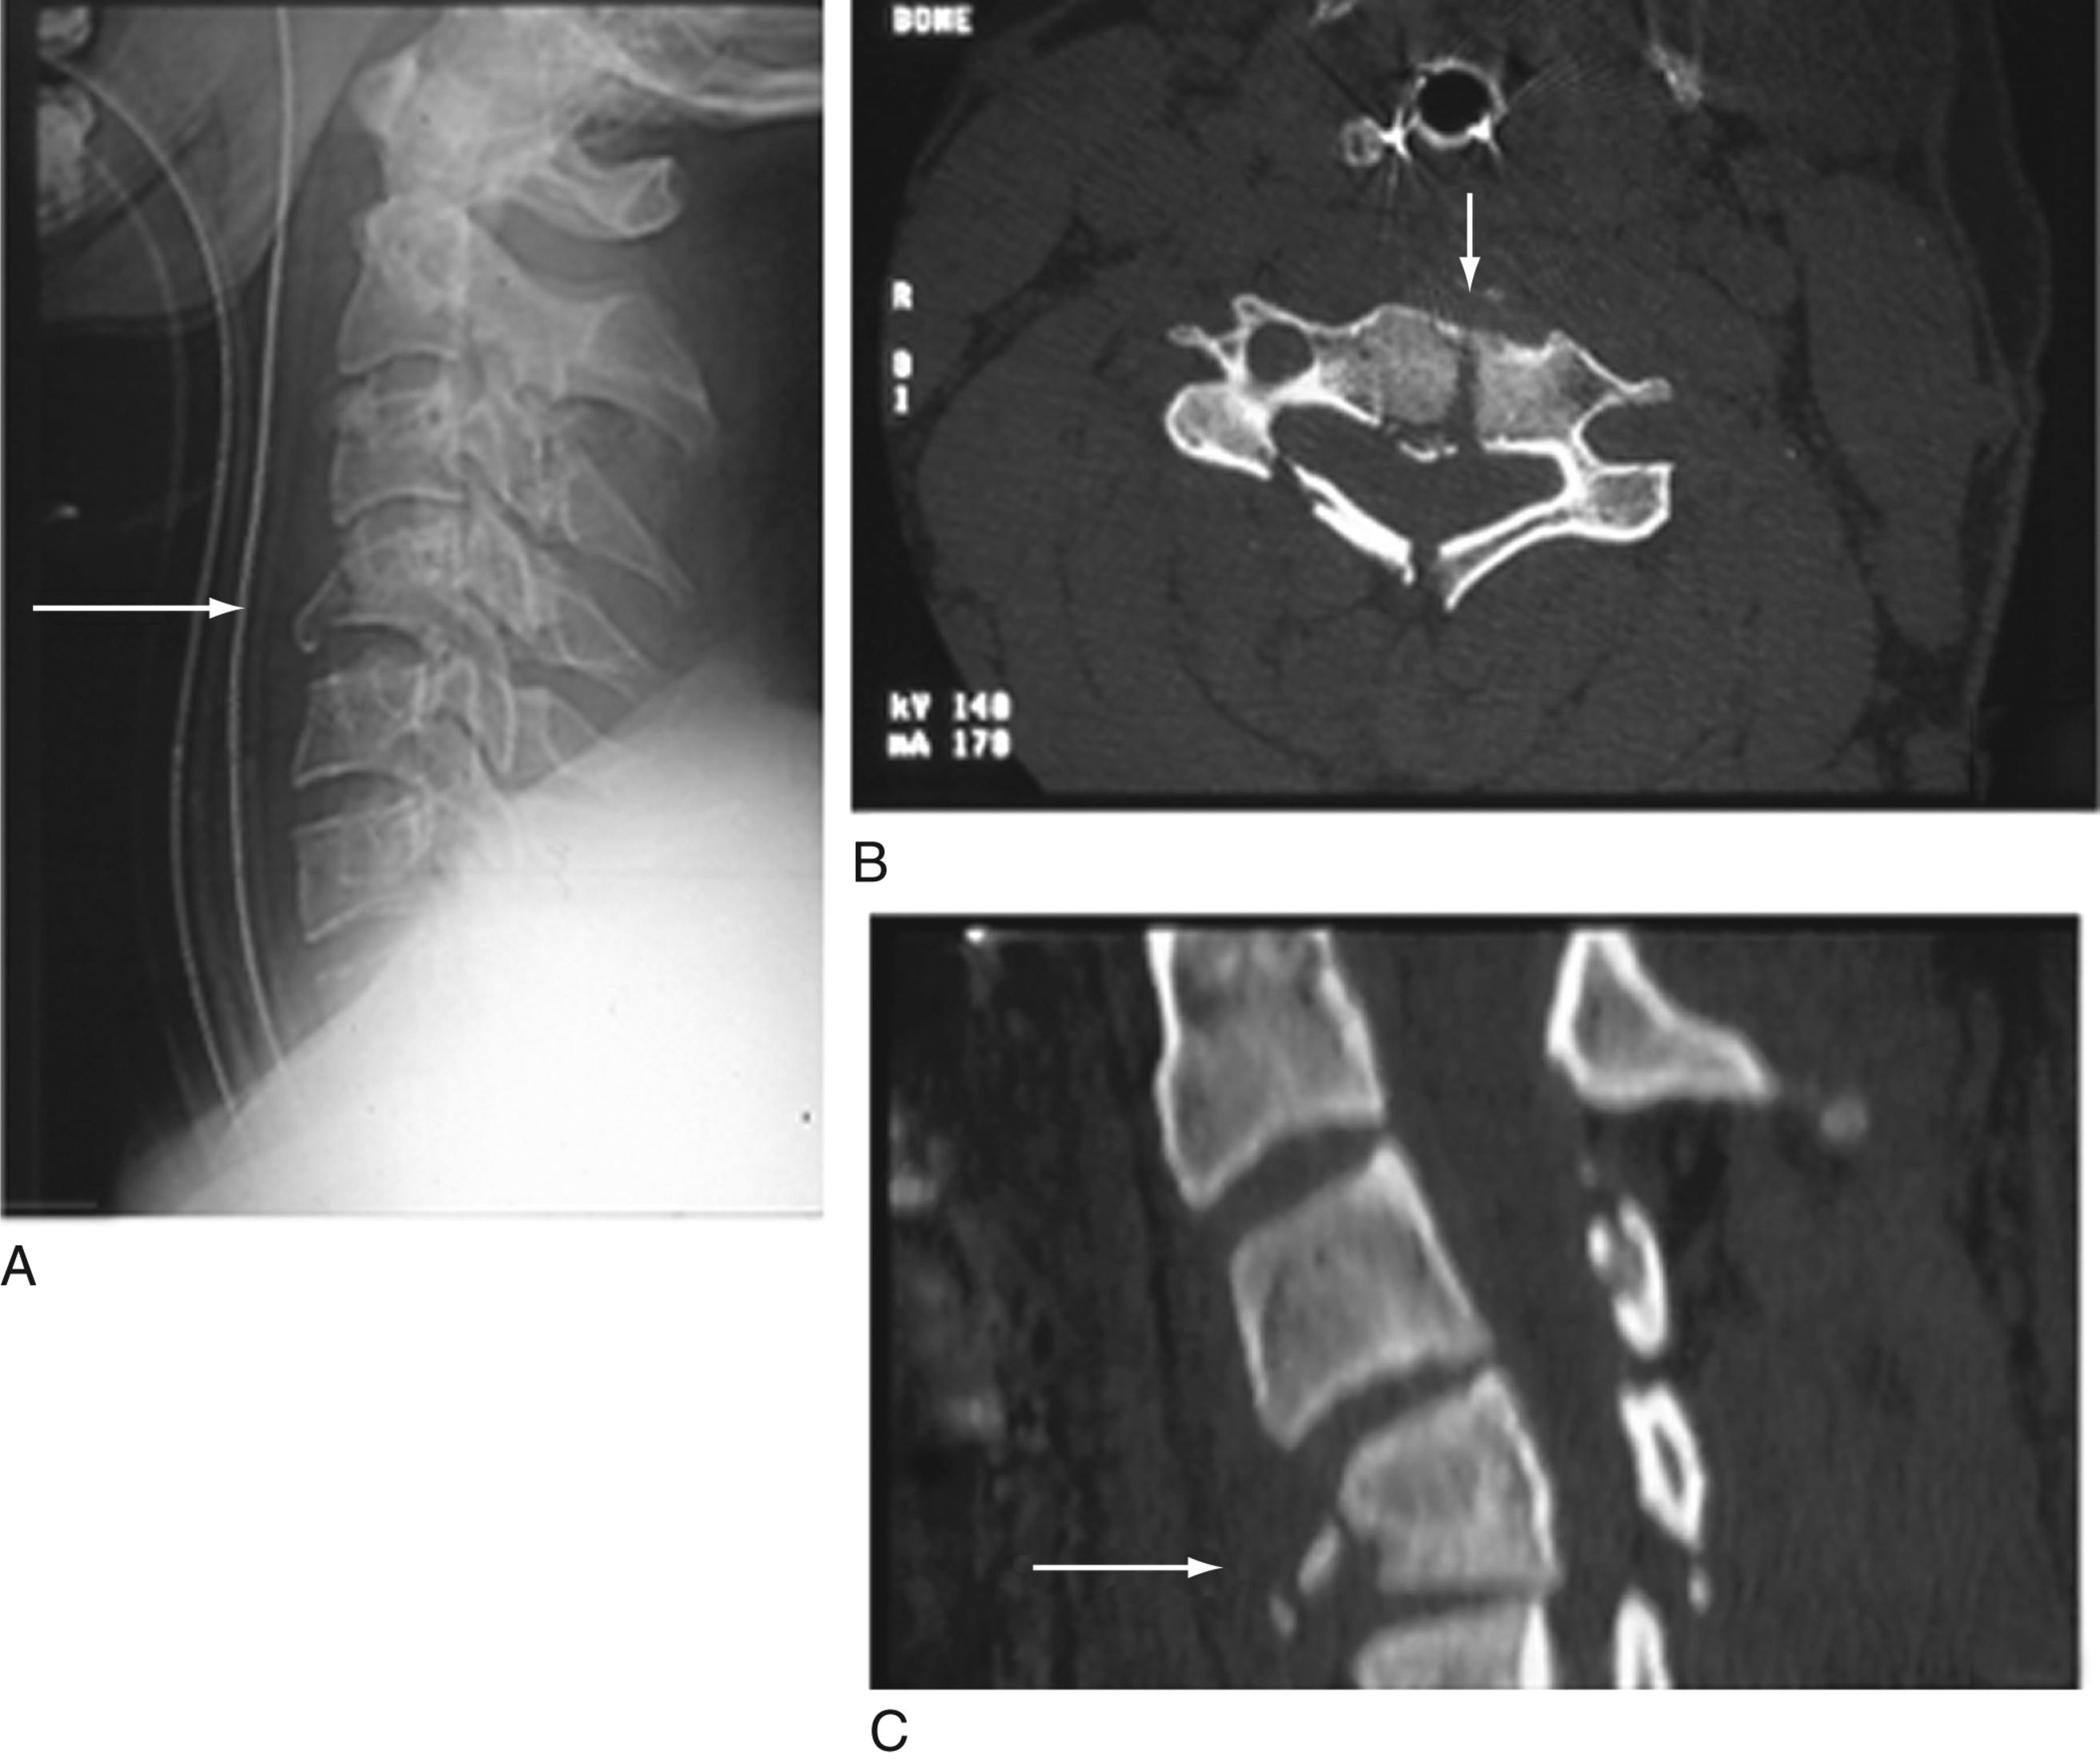 Fig. 23.3, Traumatic C4 vertebral body fracture demonstrating the fracture through the vertebral body (arrows) . (A) Lateral plain film, (B) axial computed tomography (CT) scan, and (C) sagittal CT scan.